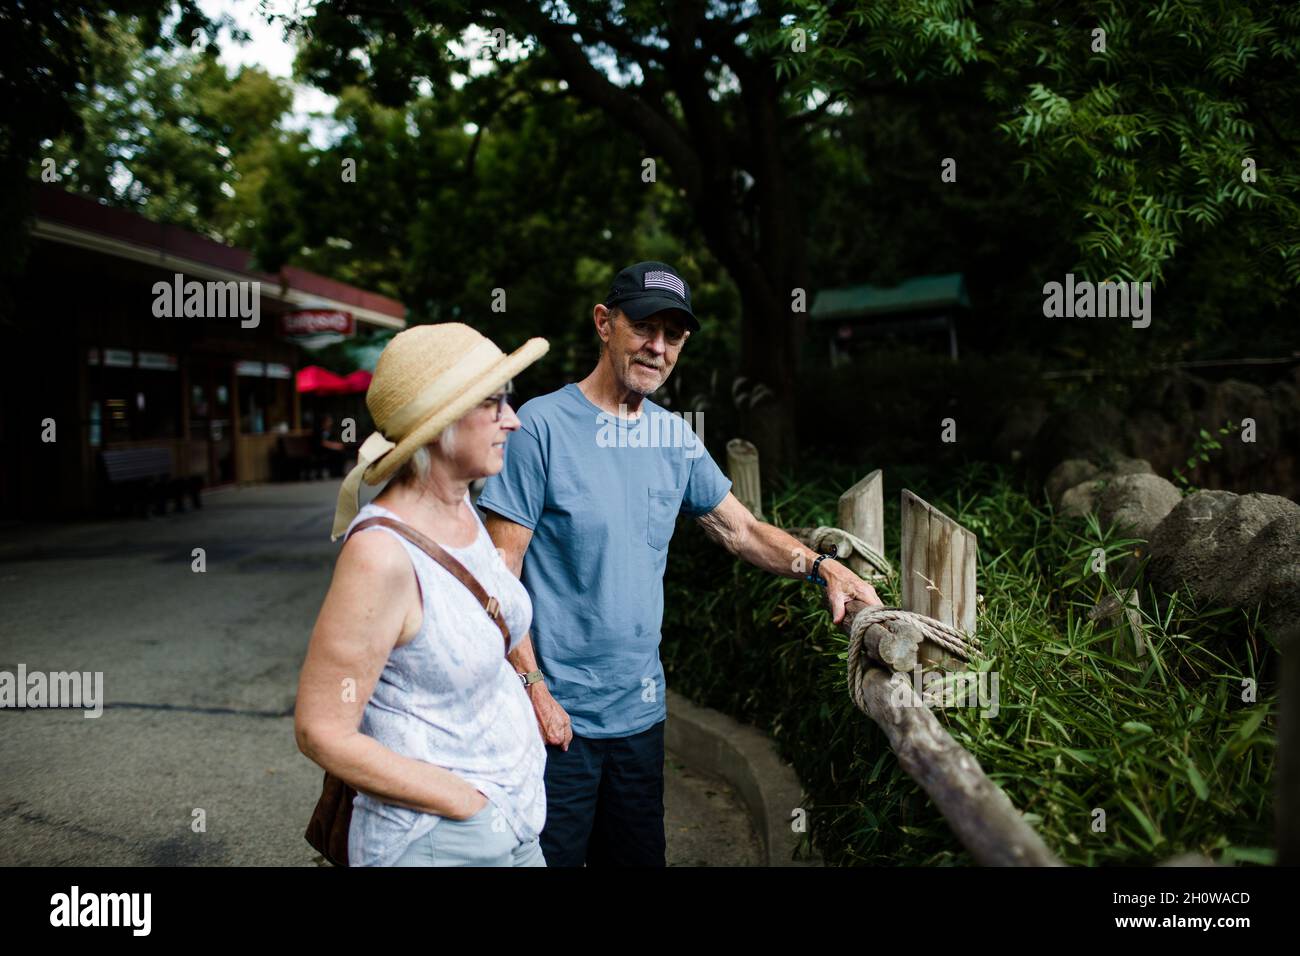 Man with Dementia Standing with Wife at the Cincinnati Zoo Stock Photo